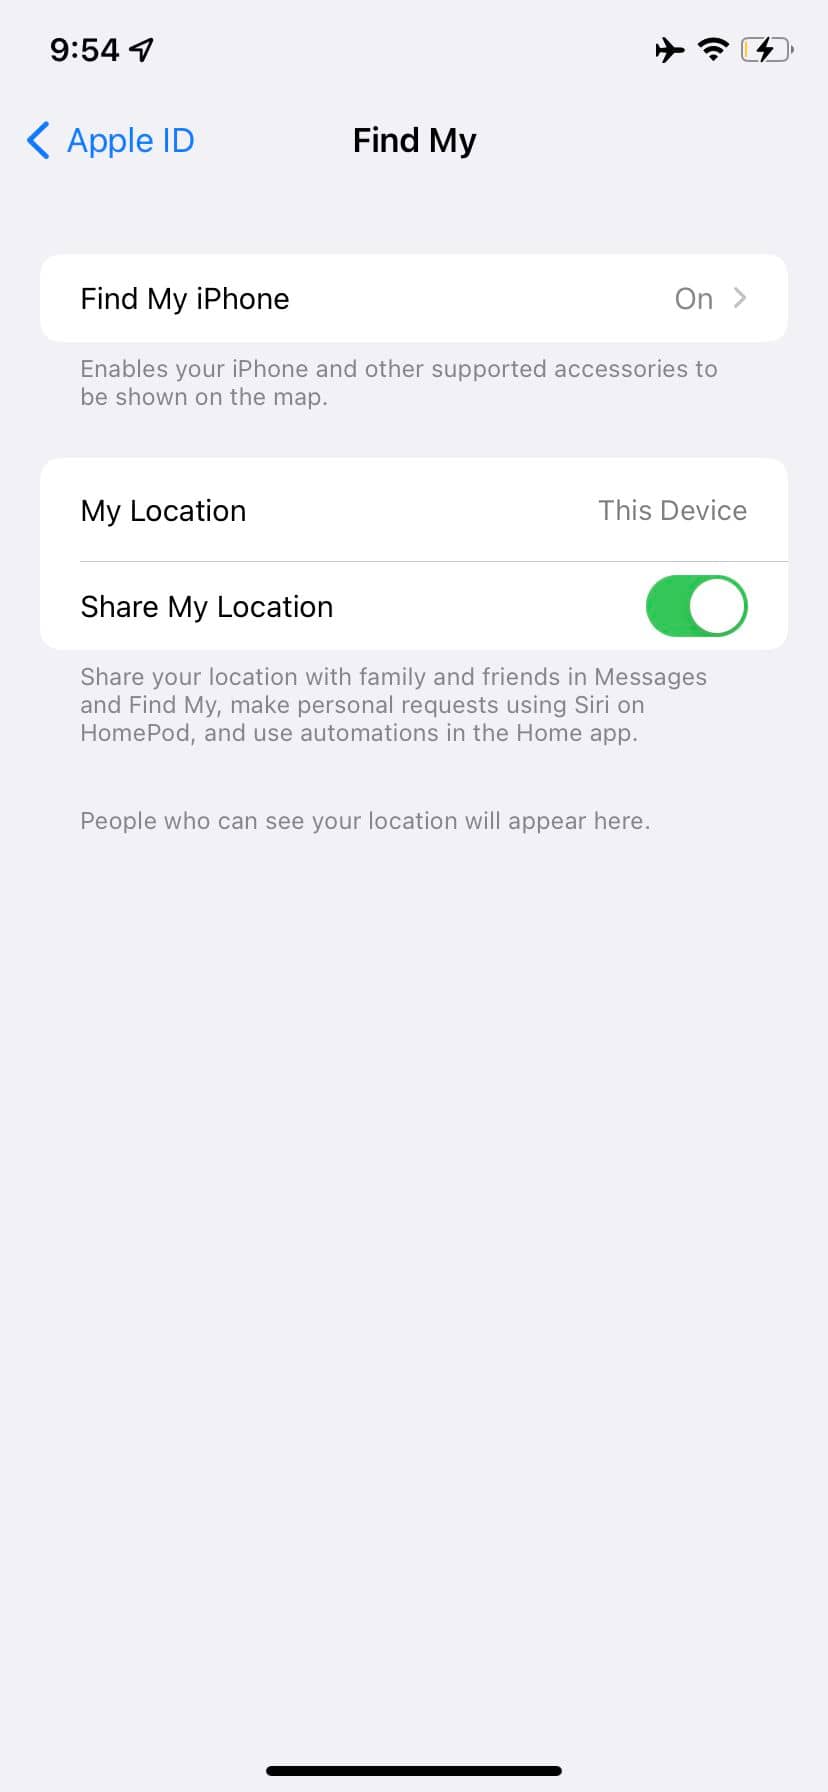 Turn on the Find My feature in your settings.